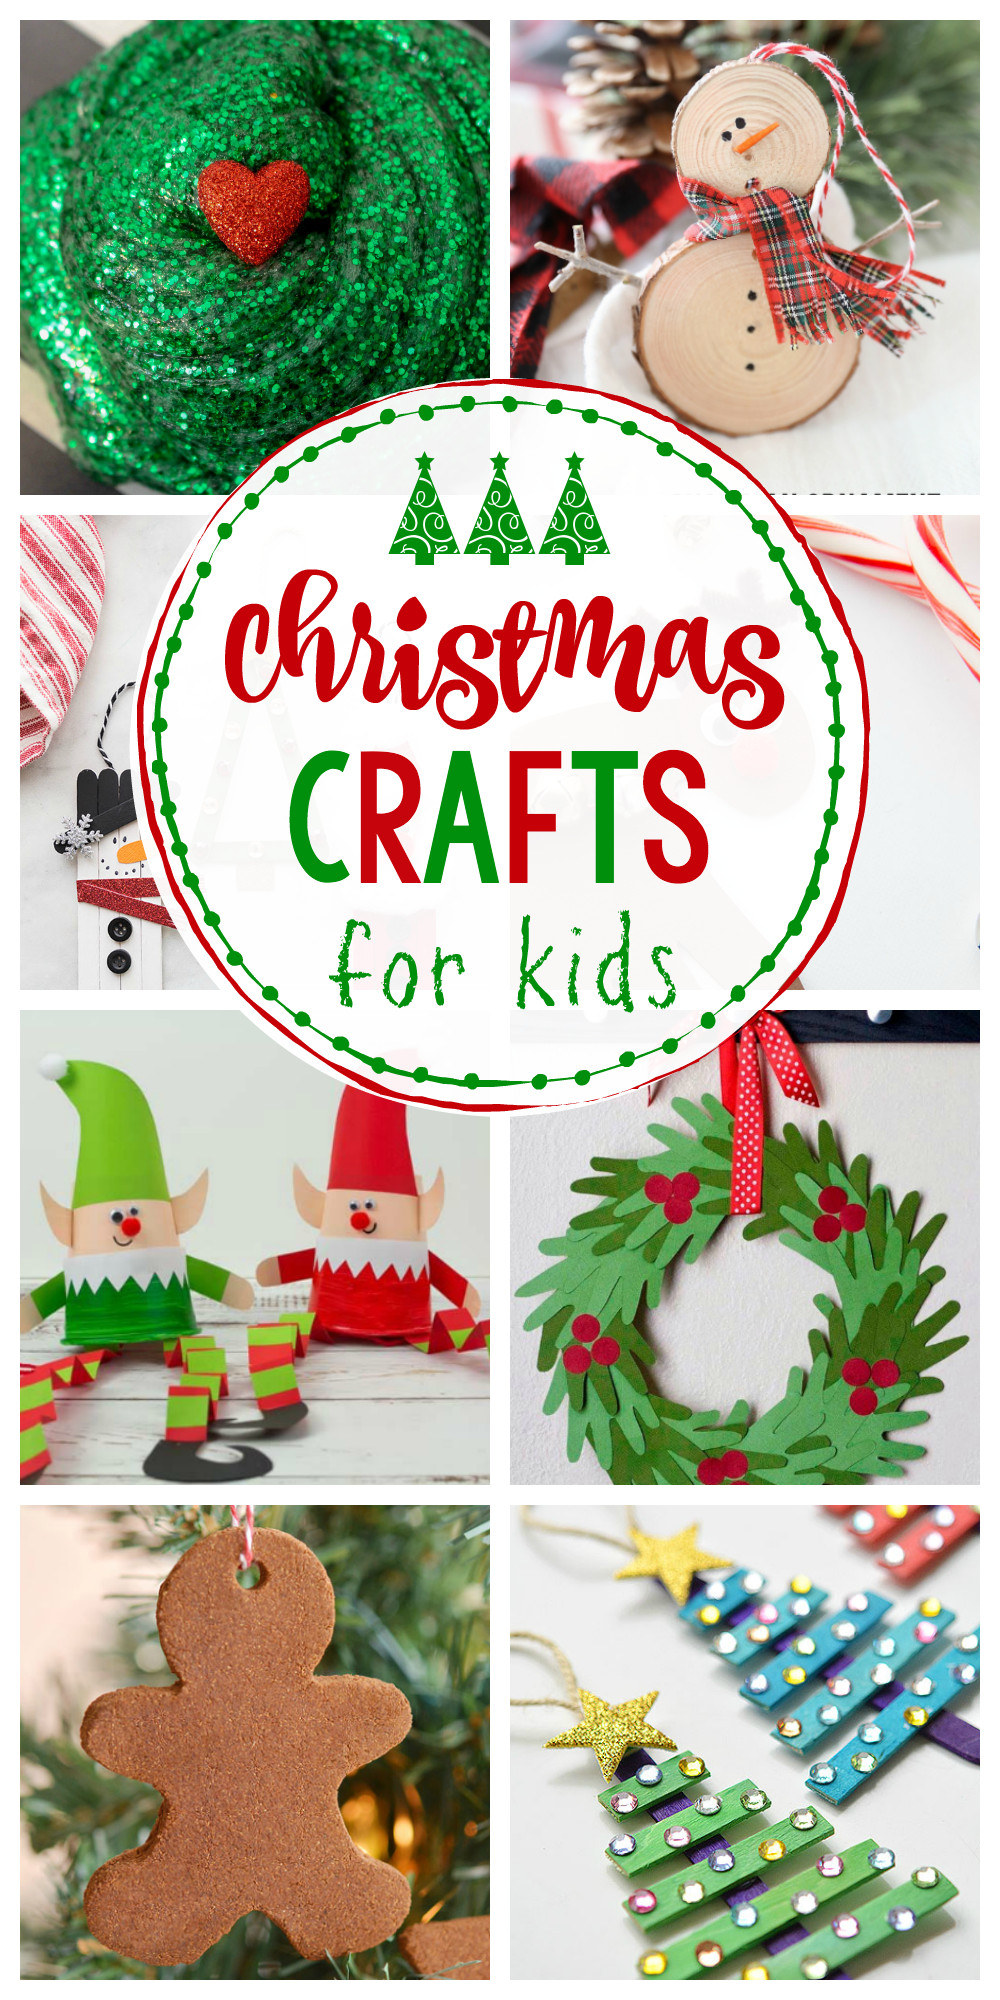 Crafts For Kids Party
 25 Easy Christmas Crafts for Kids Crazy Little Projects